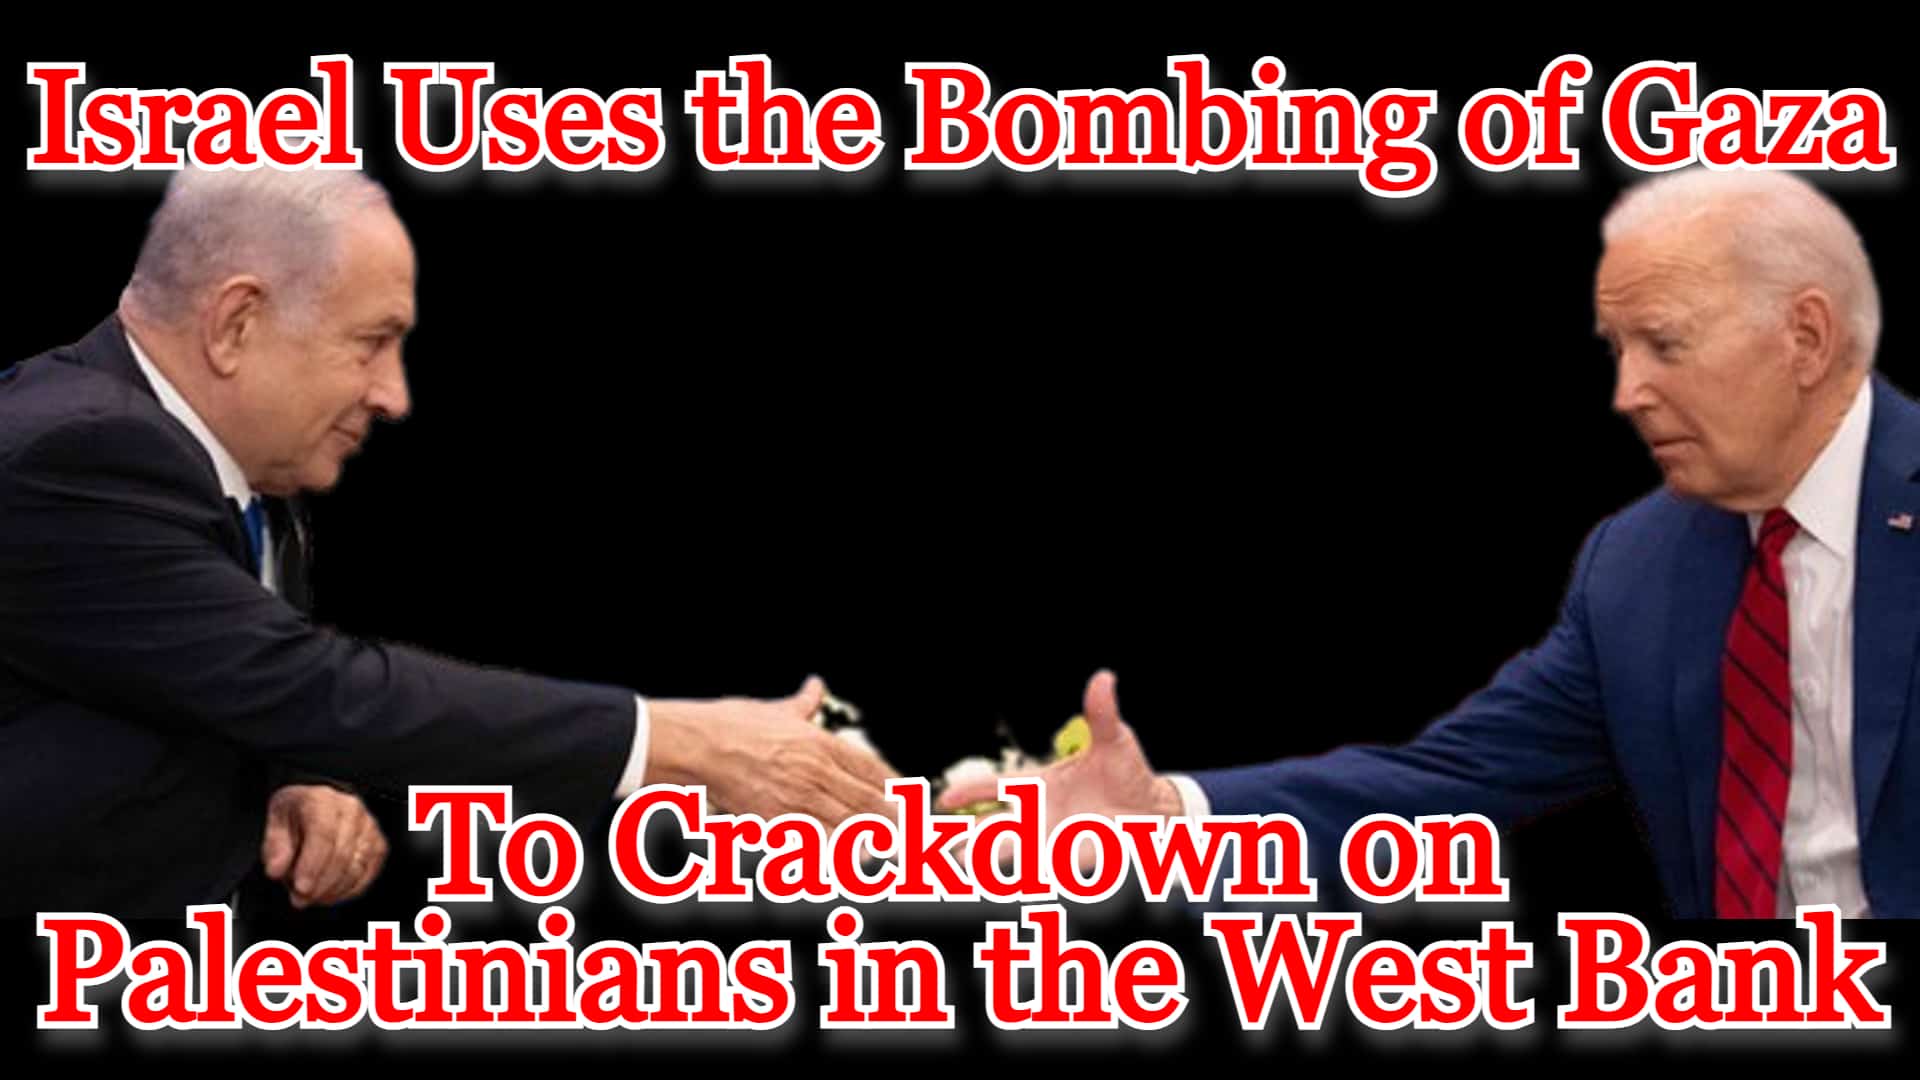 COI #494: Israel Uses the Bombing of Gaza to Crackdown on Palestinians in the West Bank